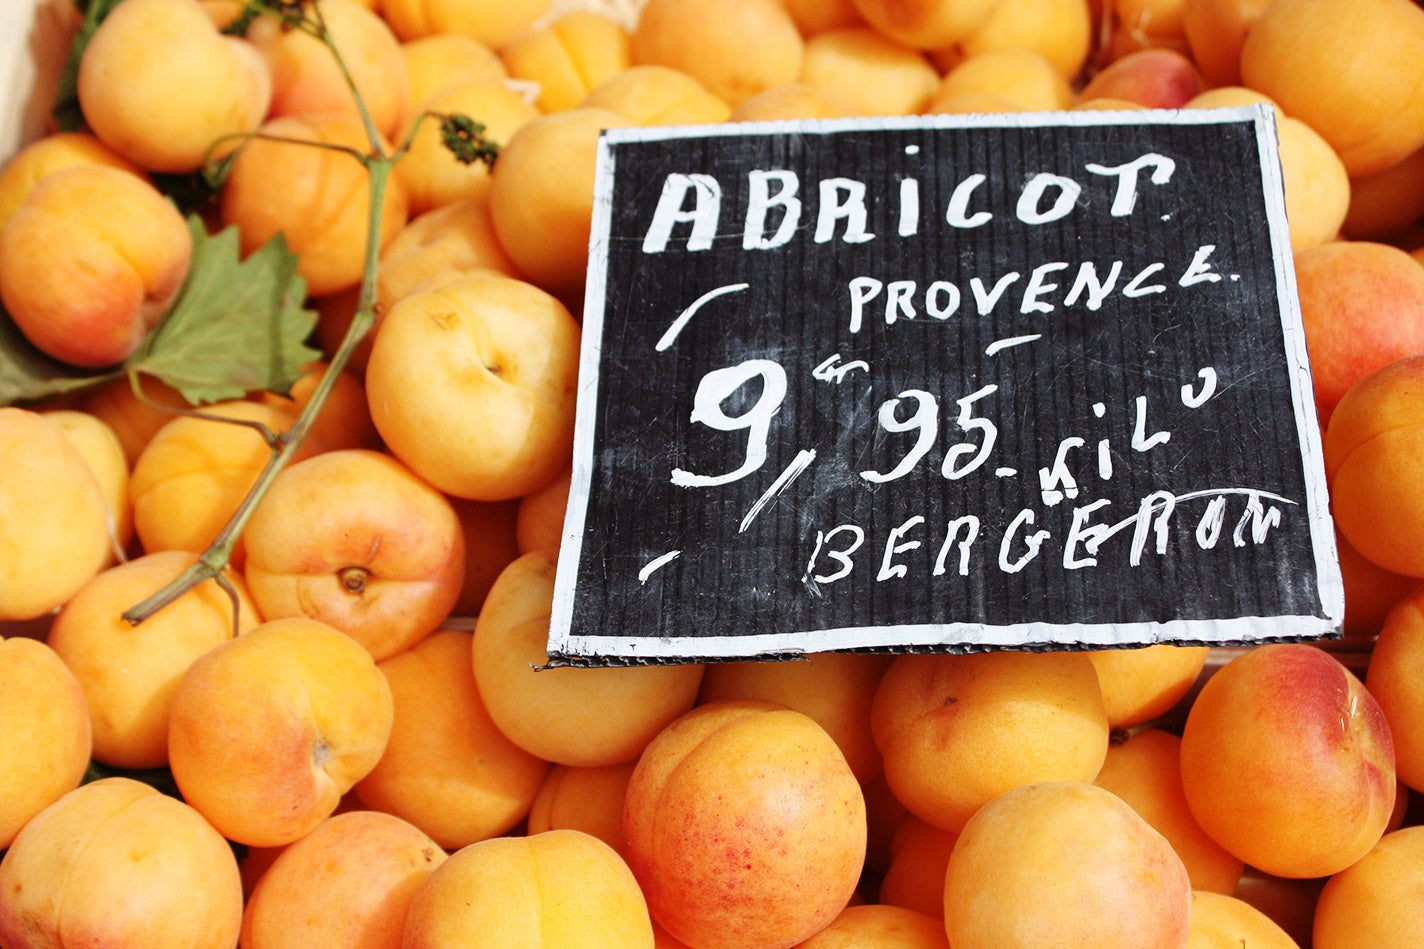 Apricots in Nice France - Every Day Paris 